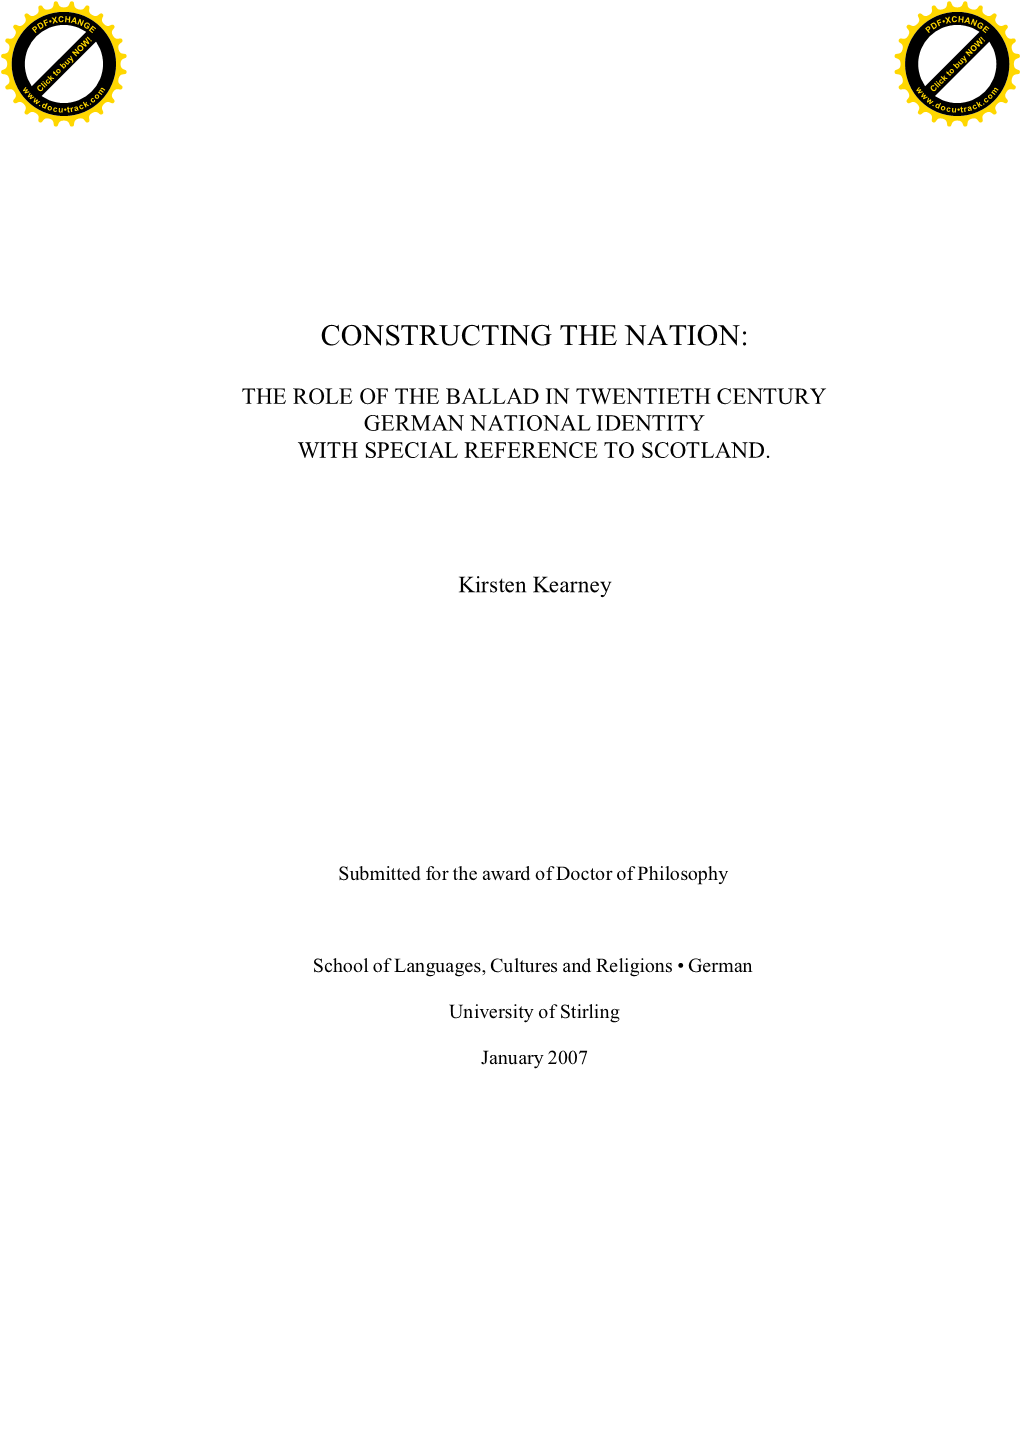 Constructing the Nation